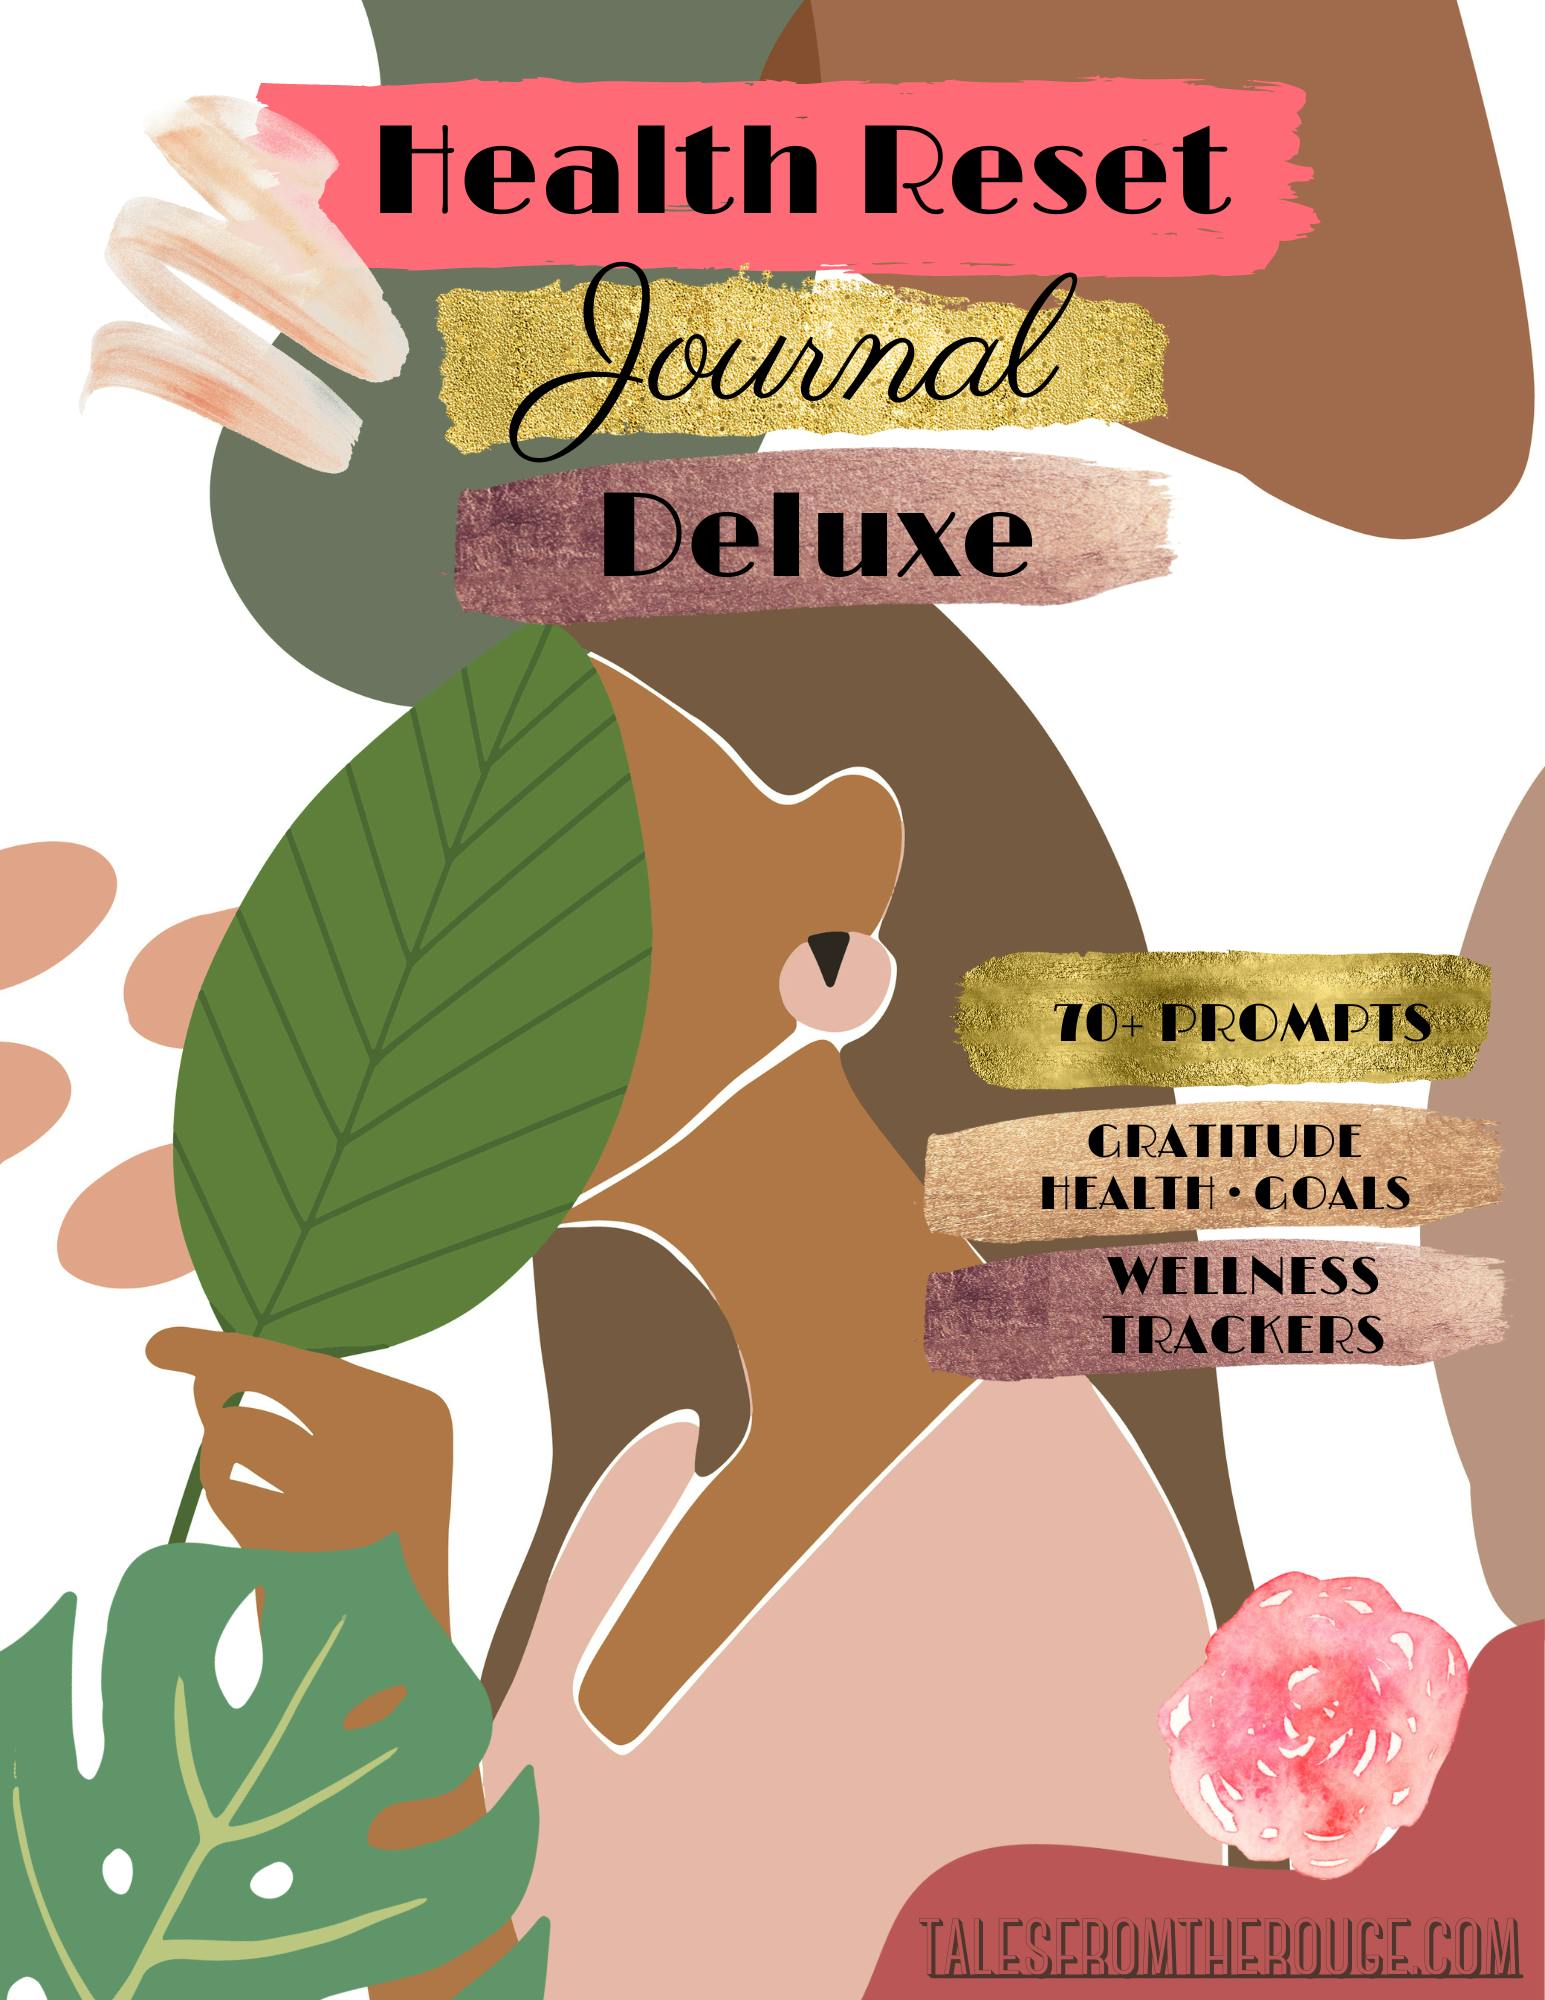 Tales From the Rouge Health Reset Journal - Deluxe Edition (Personal Use)